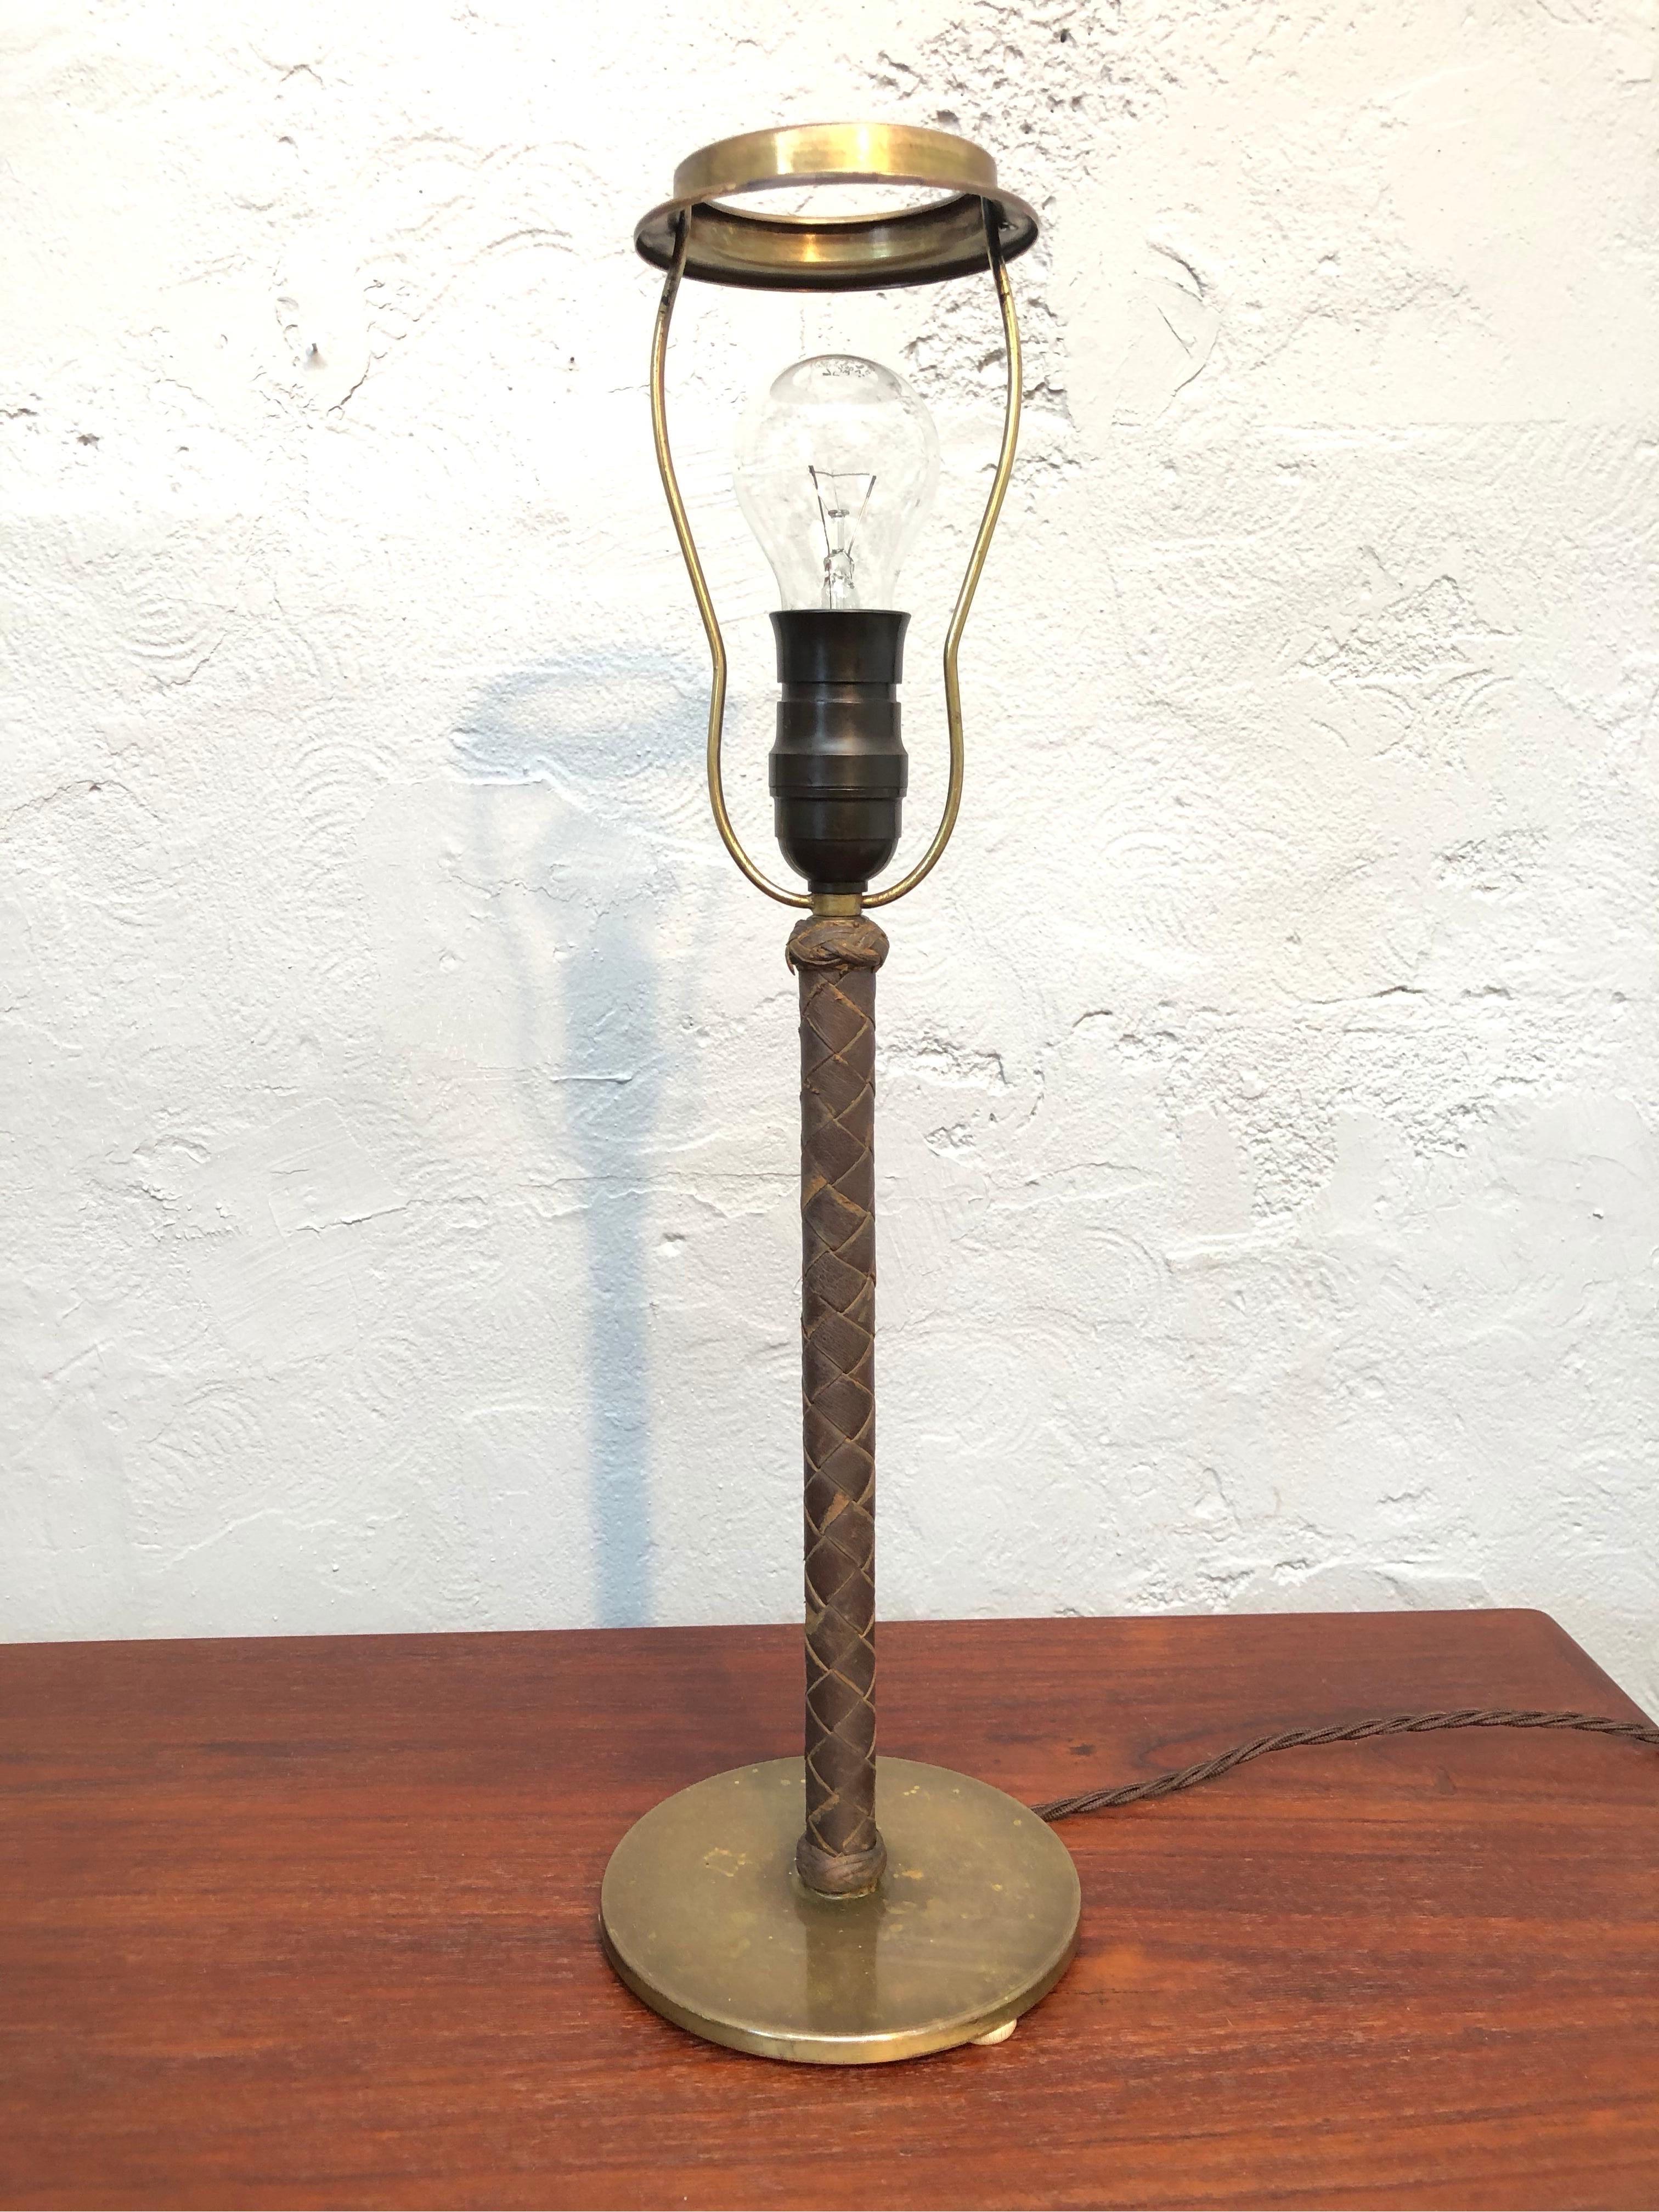 Stylish Mid-Century Modern table lamp in brass and leather.
Cast iron base with a brass covering.
Leather pleated stem.
Great quality typical of the period.
Rewired with a brown twisted cloth flex and grounded.
Original Bakelite lamp holder